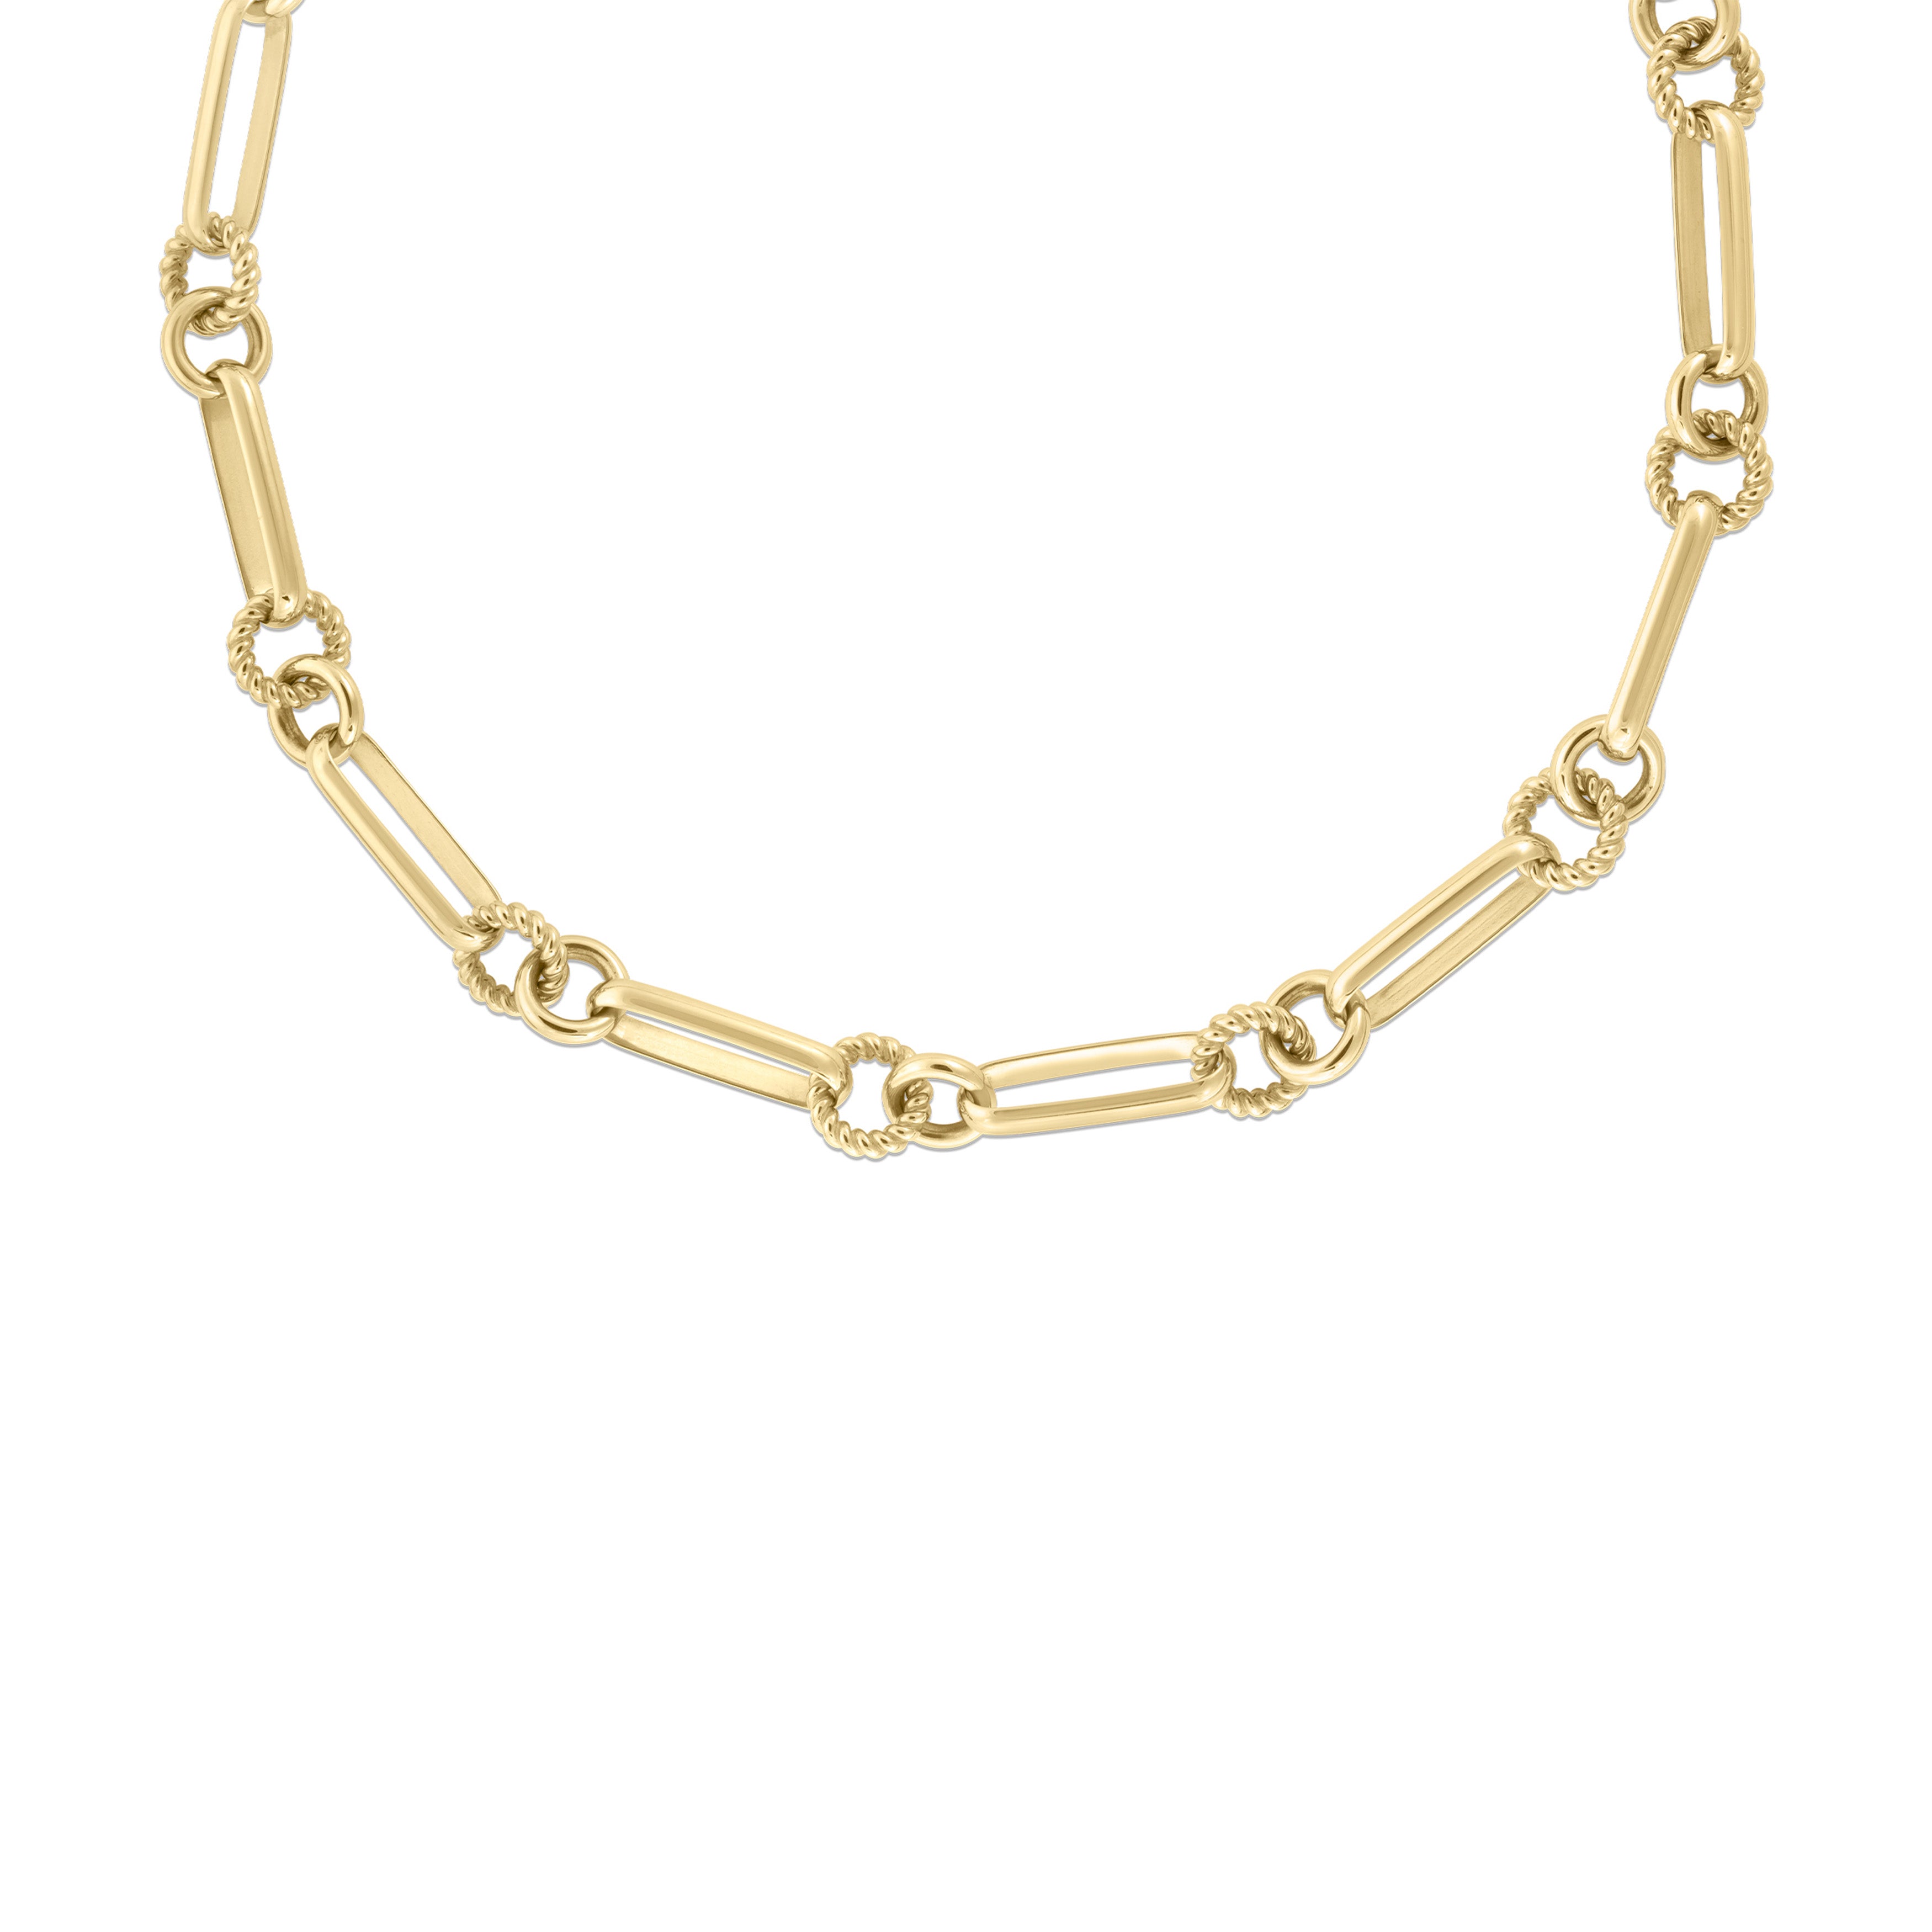 18K YELLOW GOLD Roberto Coin OVAL AND POLISHED/FLUTED ROUND LINK CHAIN